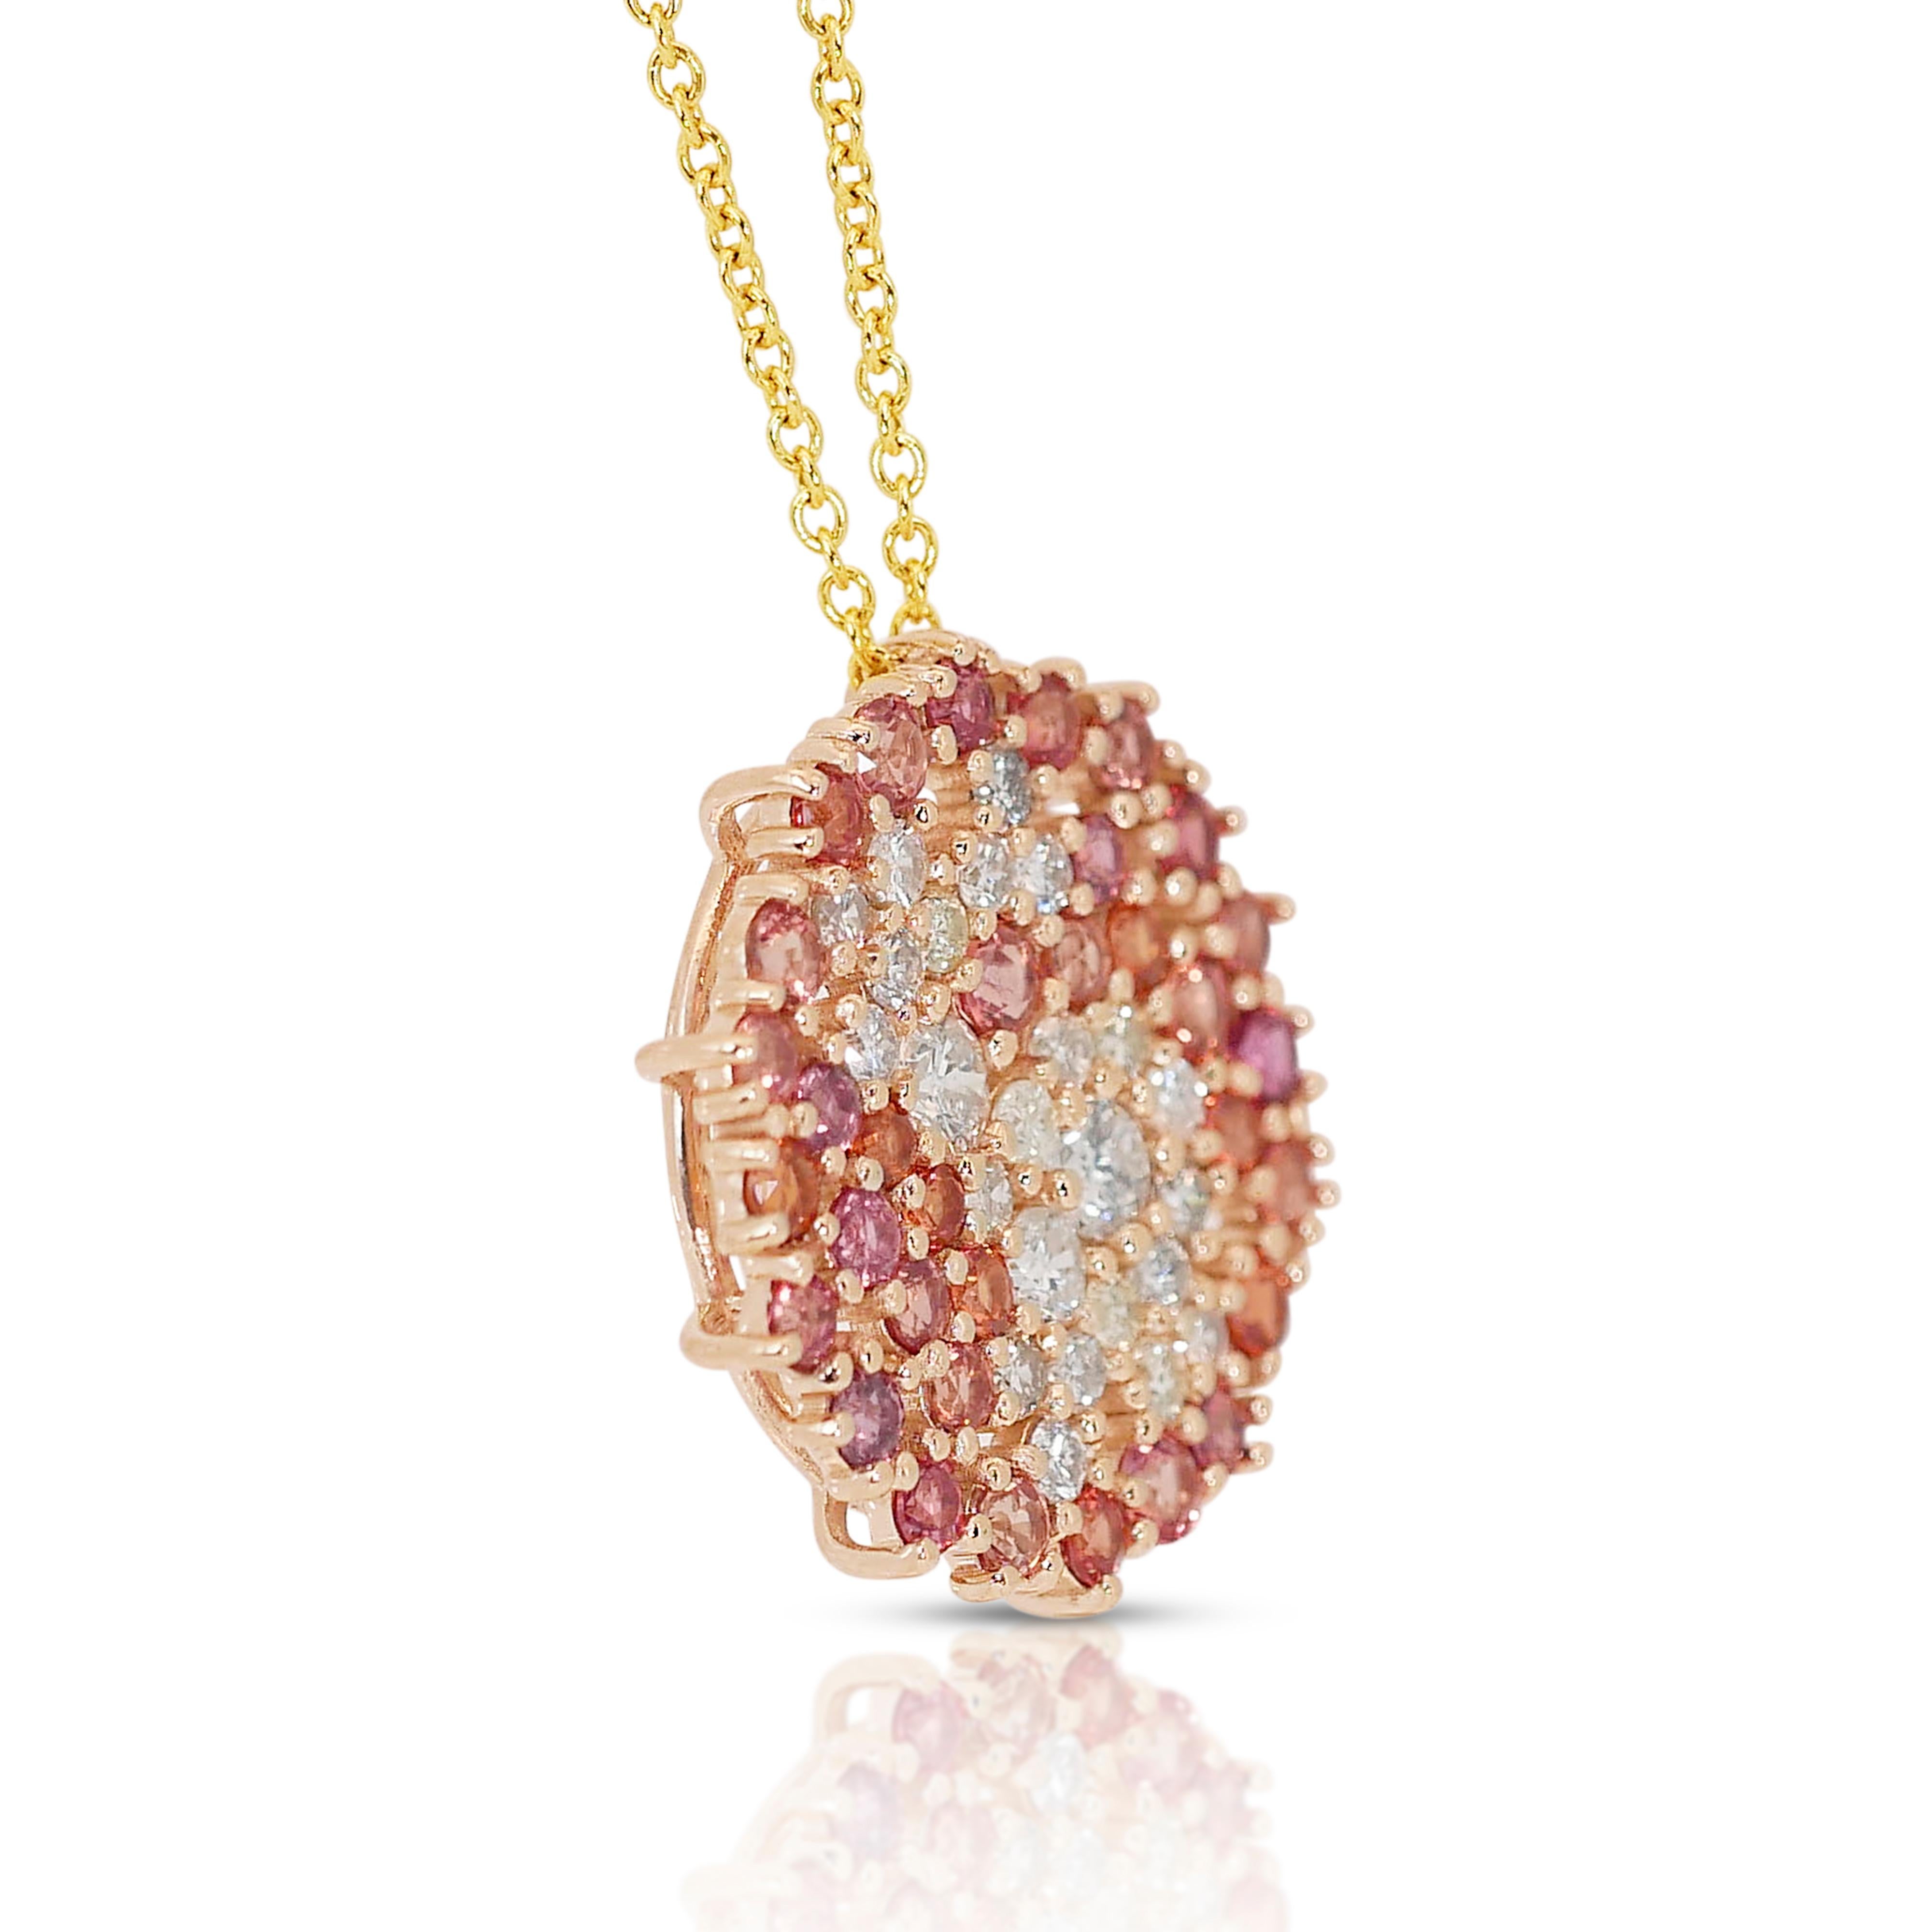 Captivating 14K Yellow Gold Sapphire and Diamond Pendant Necklace w/ 4.05ct -AIG In New Condition For Sale In רמת גן, IL